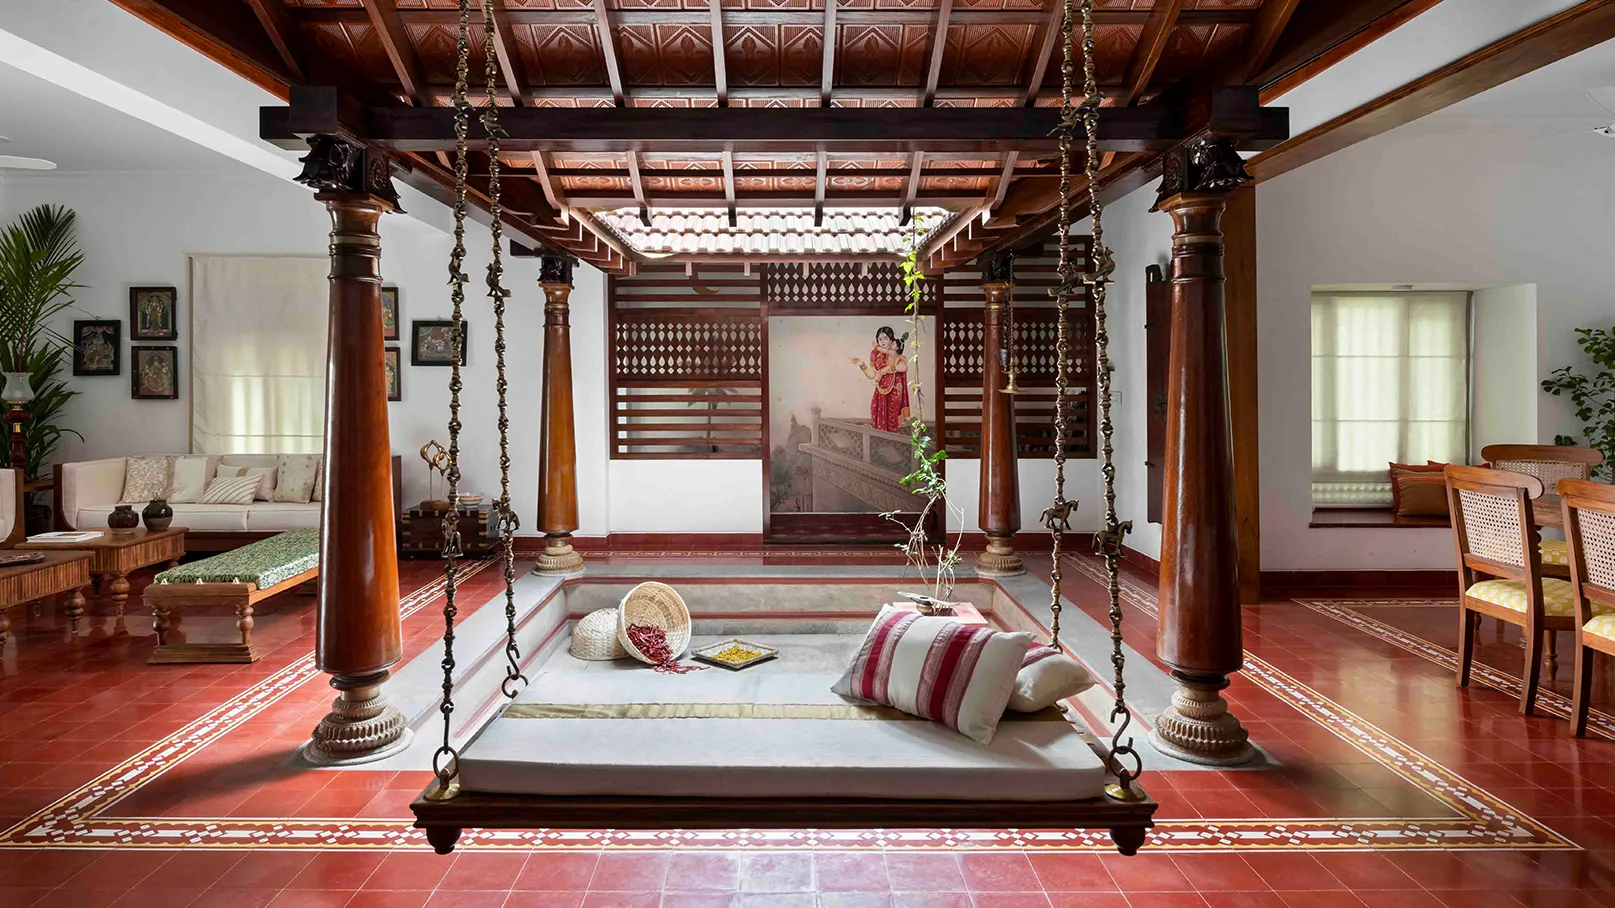 5 traditional Indian materials for your home